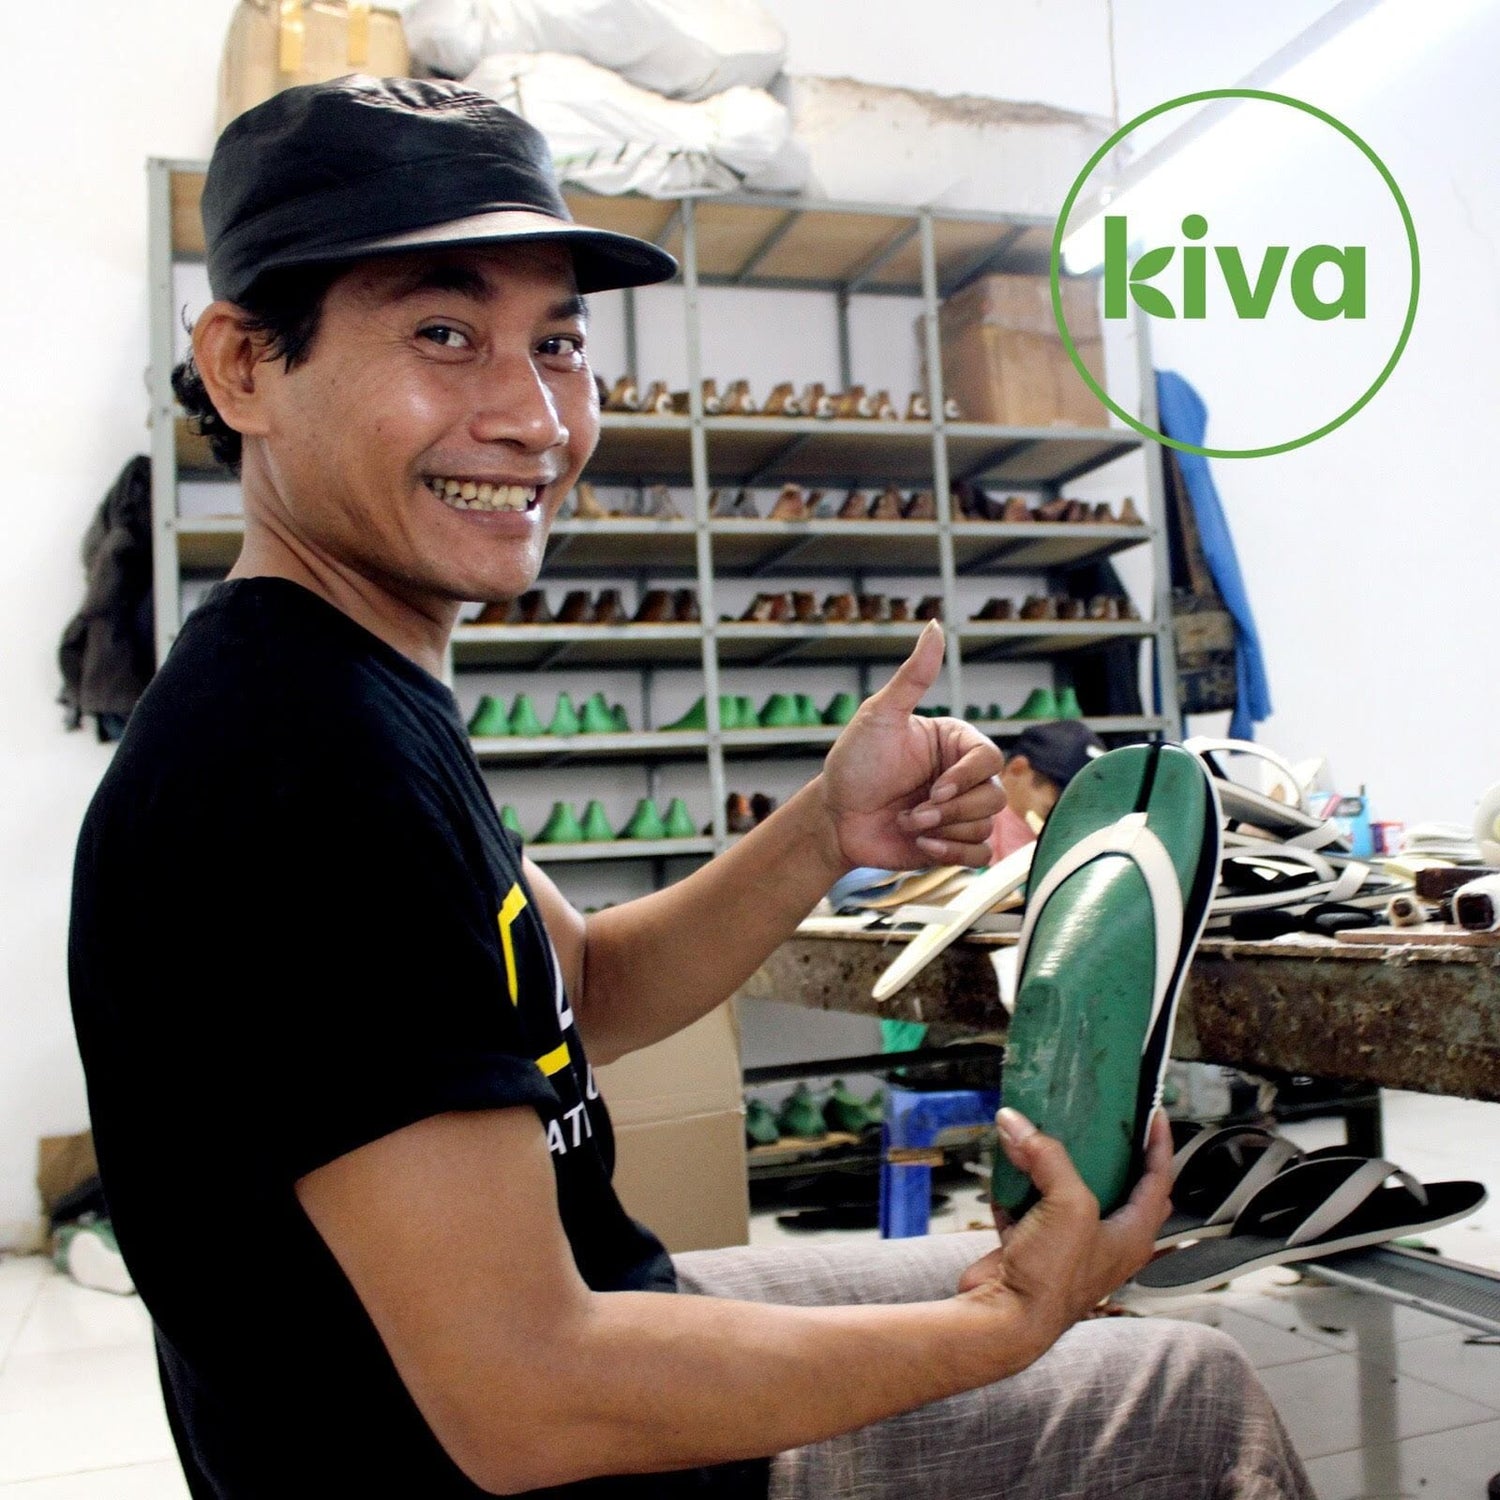 Please help us fund our 4th Kiva Loan